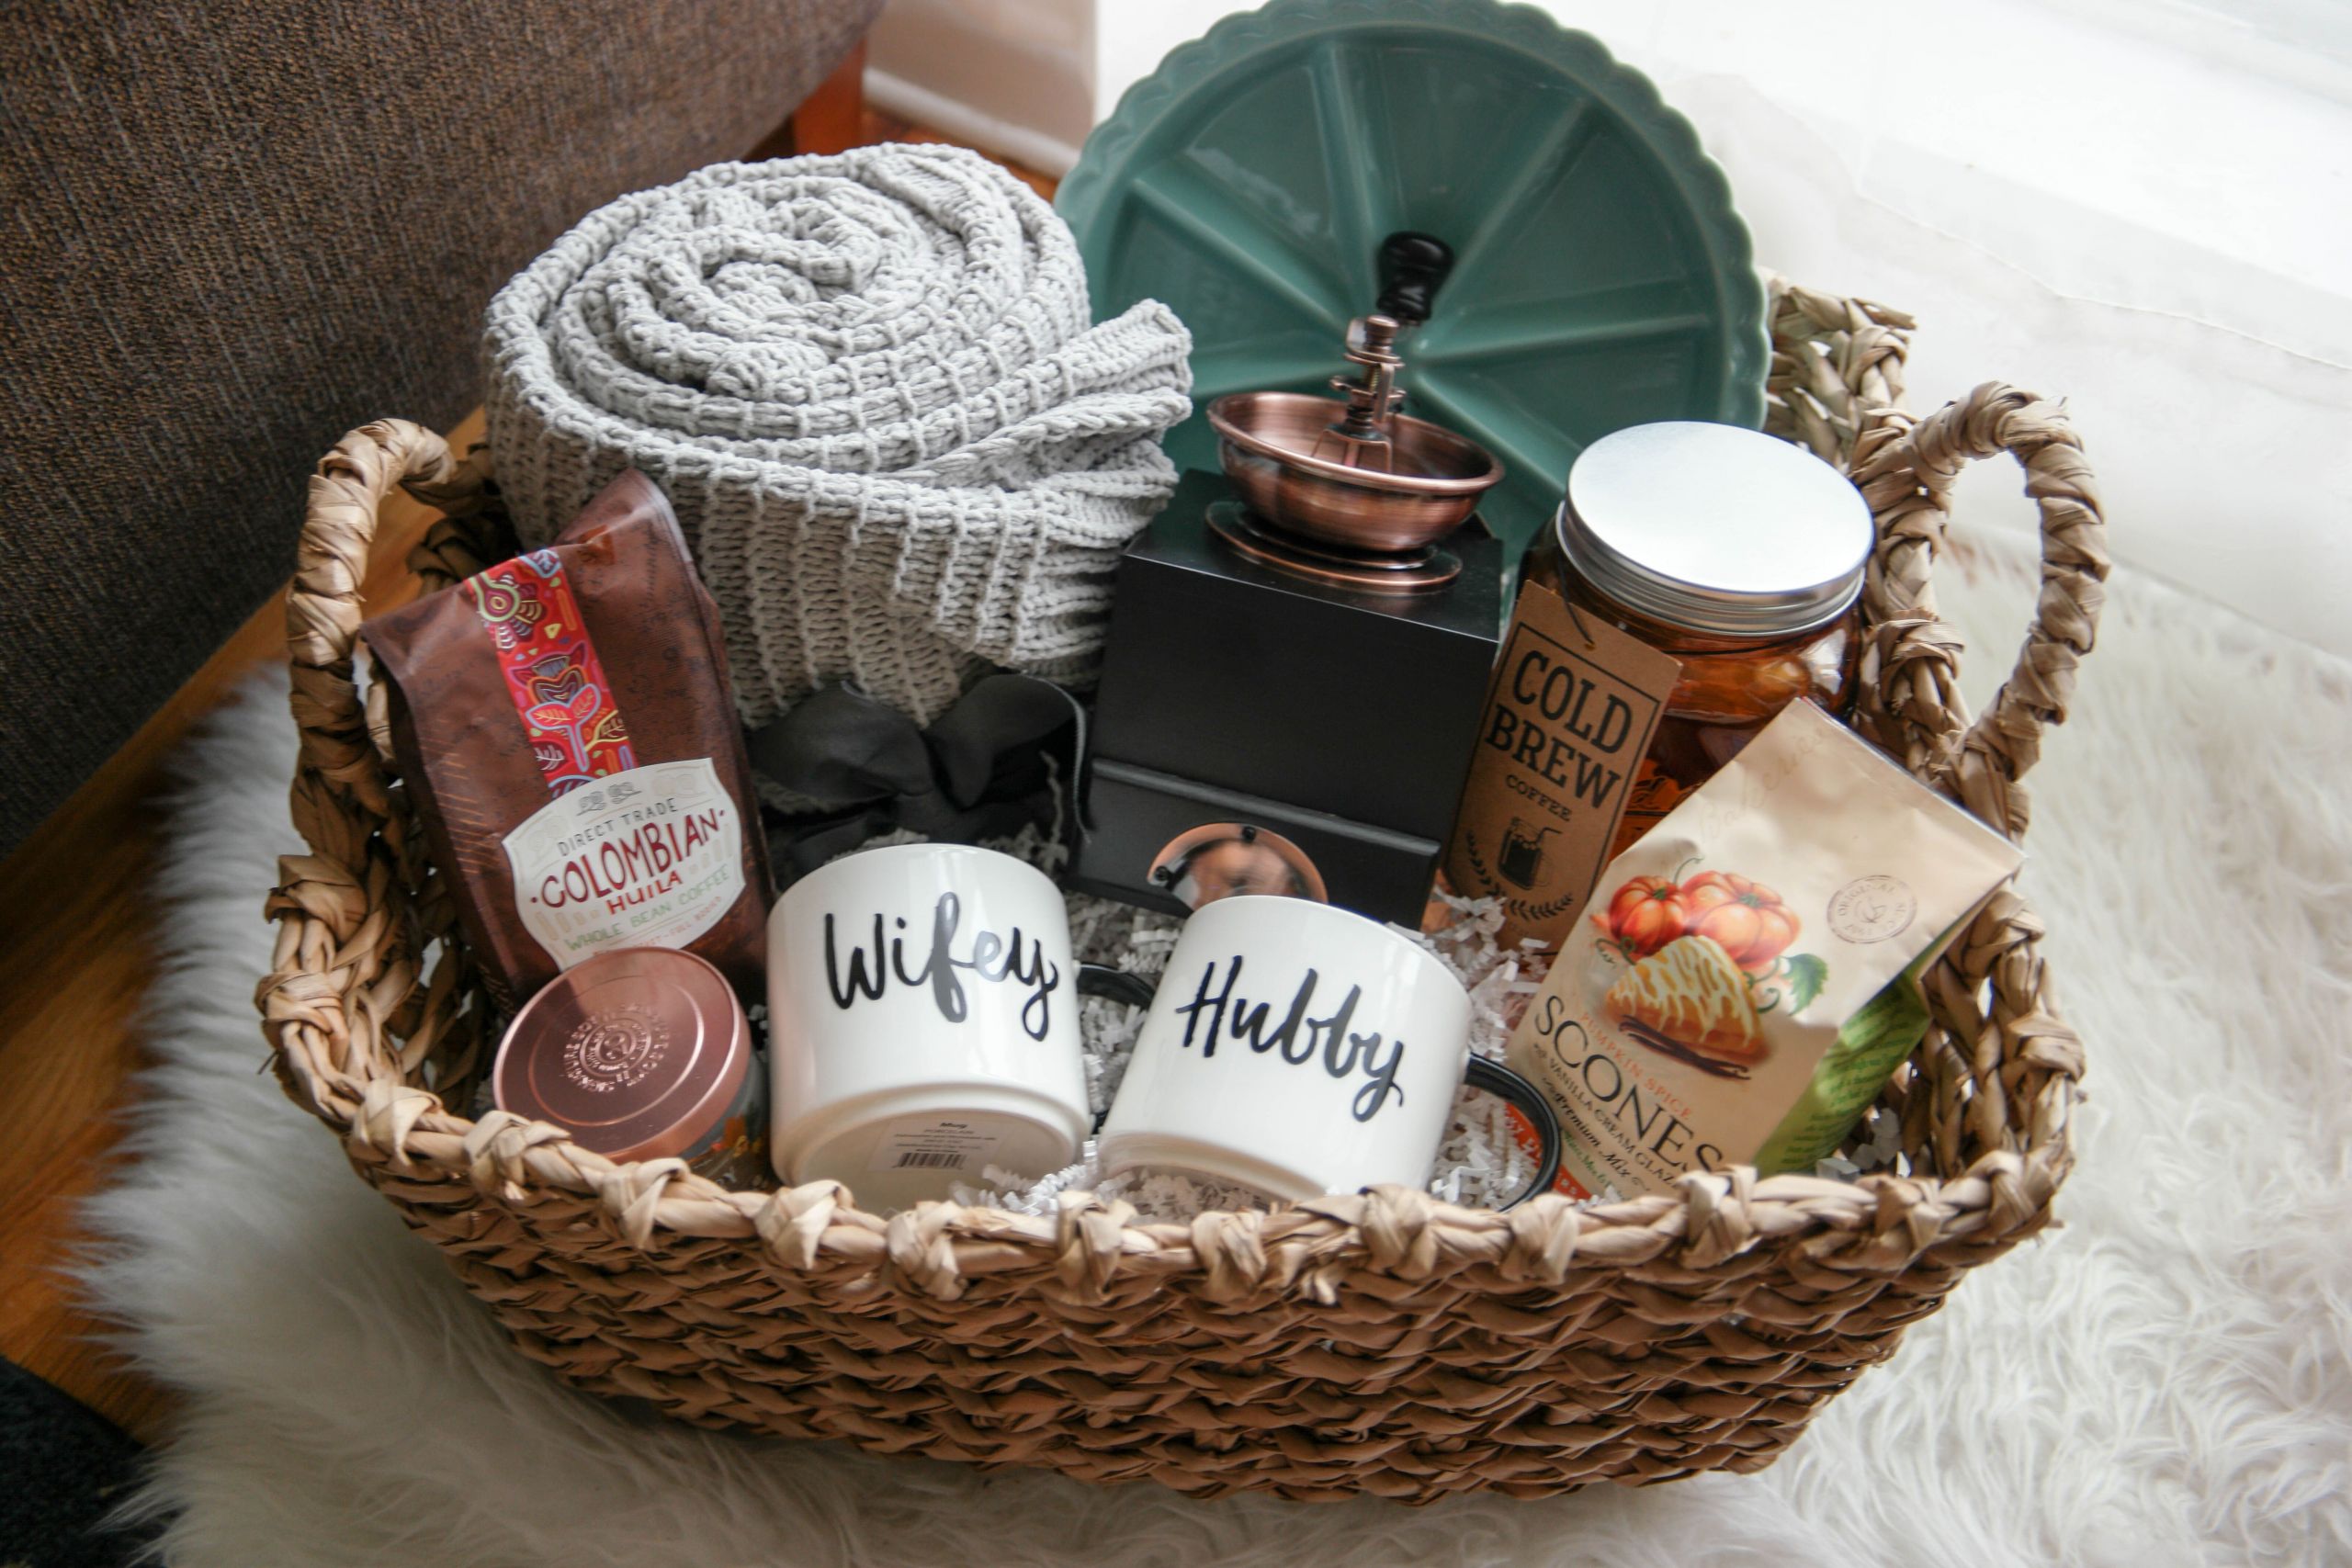 Christmas Gift Basket Ideas For Couples Elegant A Cozy Morning Gift Basket A Perfect Gift For Newlyweds Of Christmas Gift Basket Ideas For Couples Scaled 